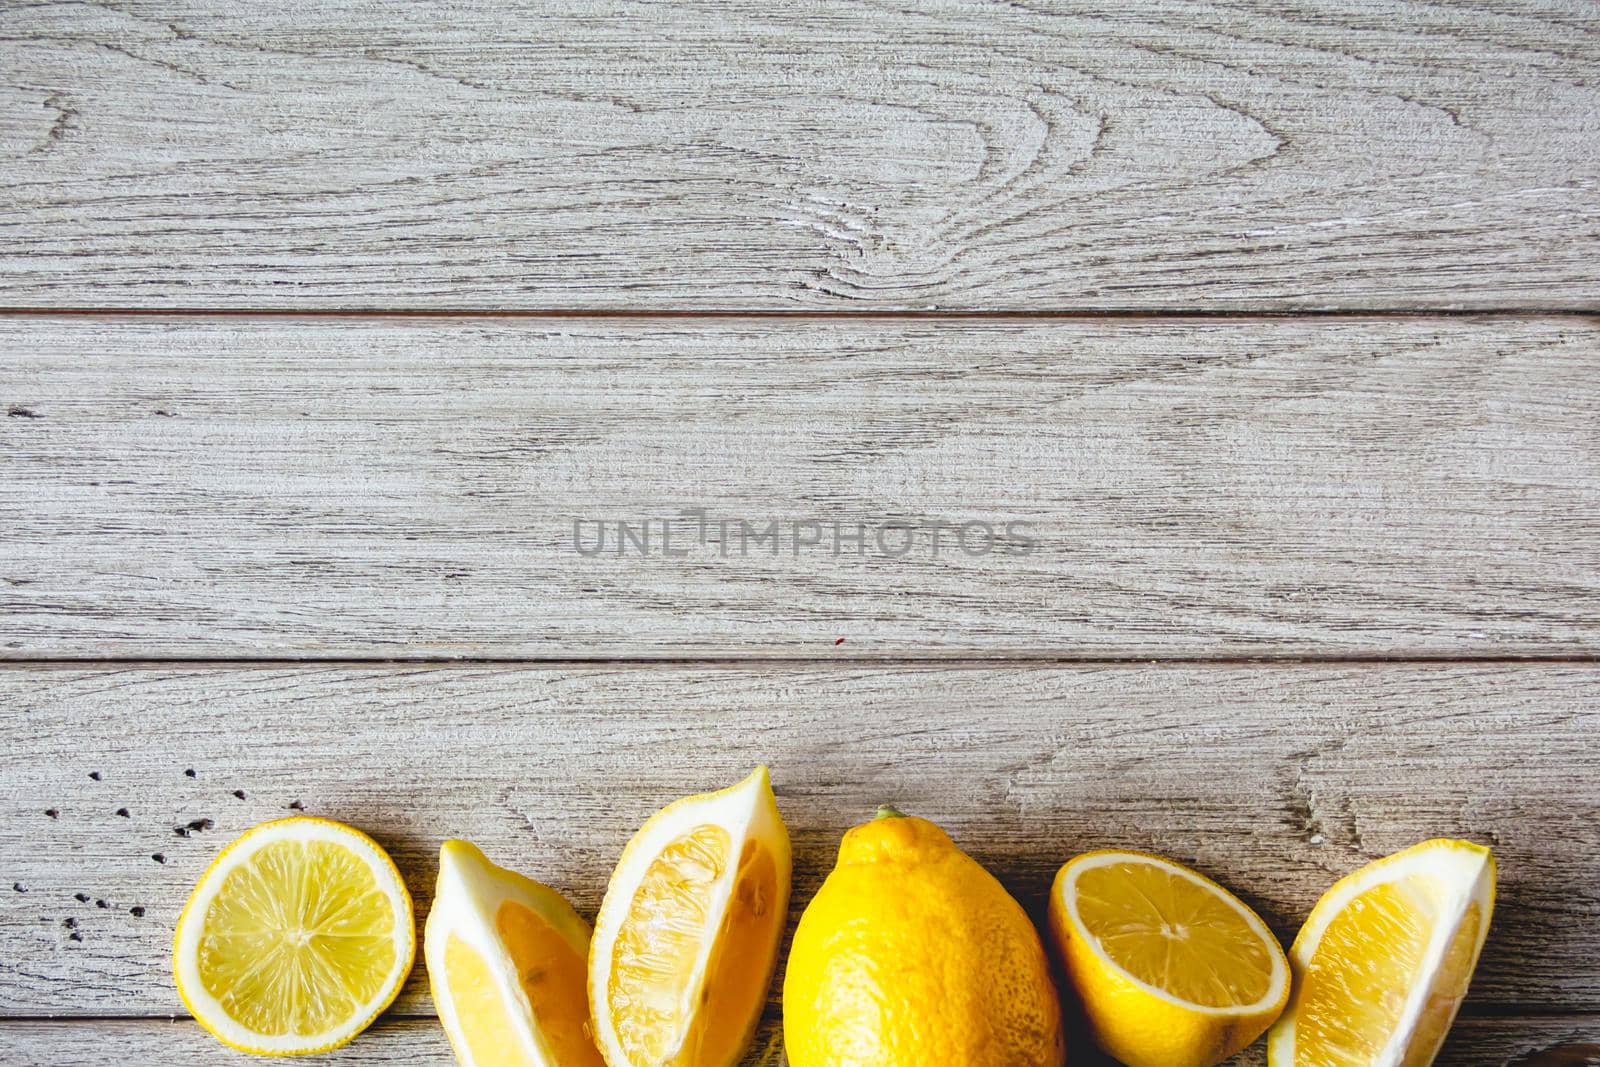 Fresh sliced lemon on wooden natural background with space for text. Healthy food concept.